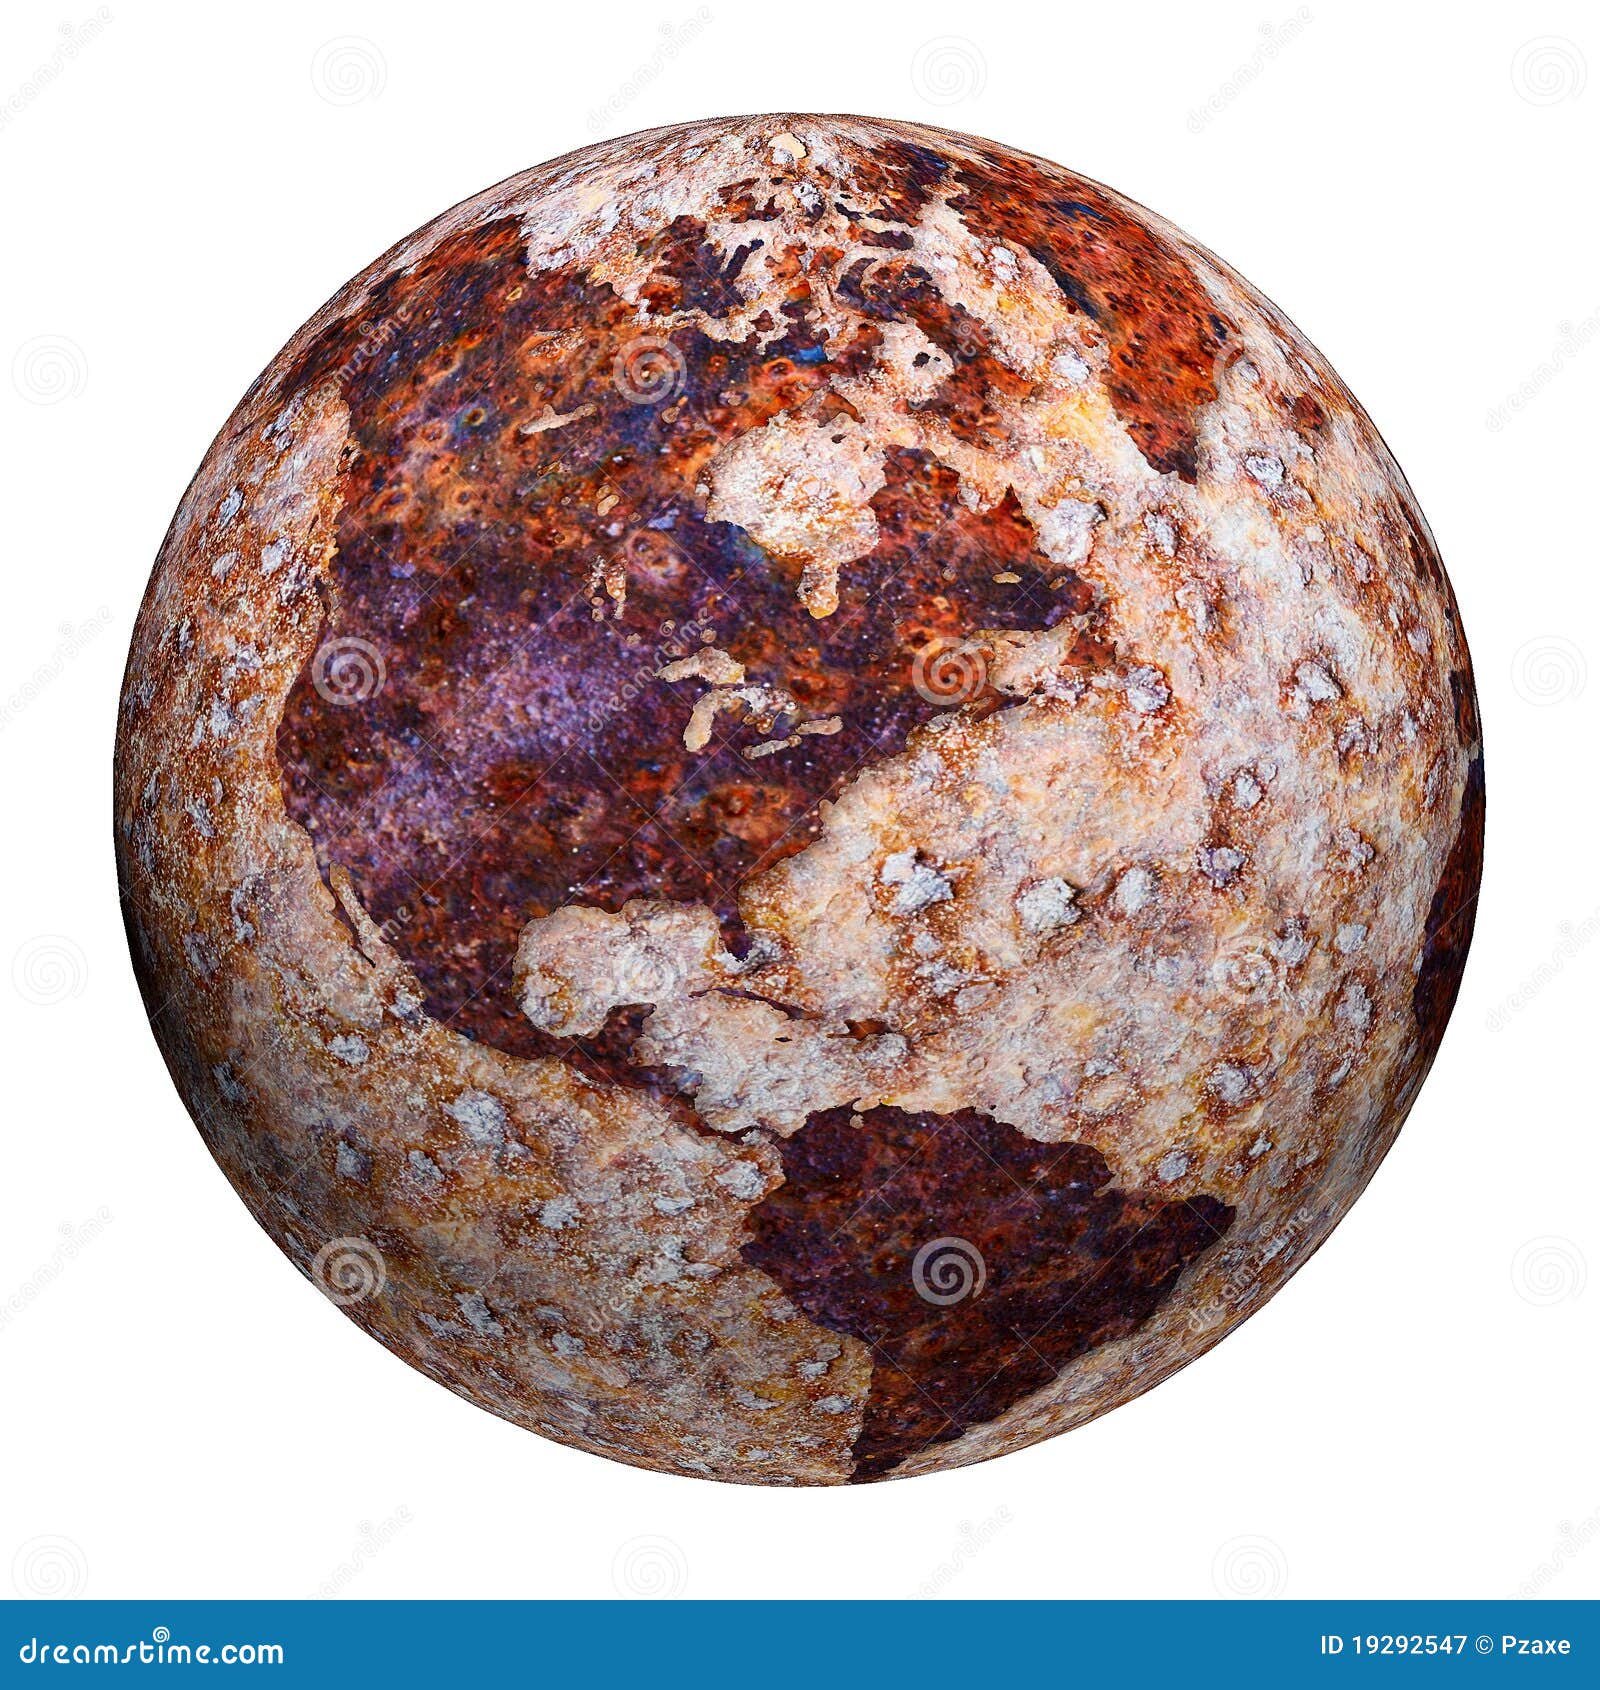 terrestrial globe - corrosion stains on iron